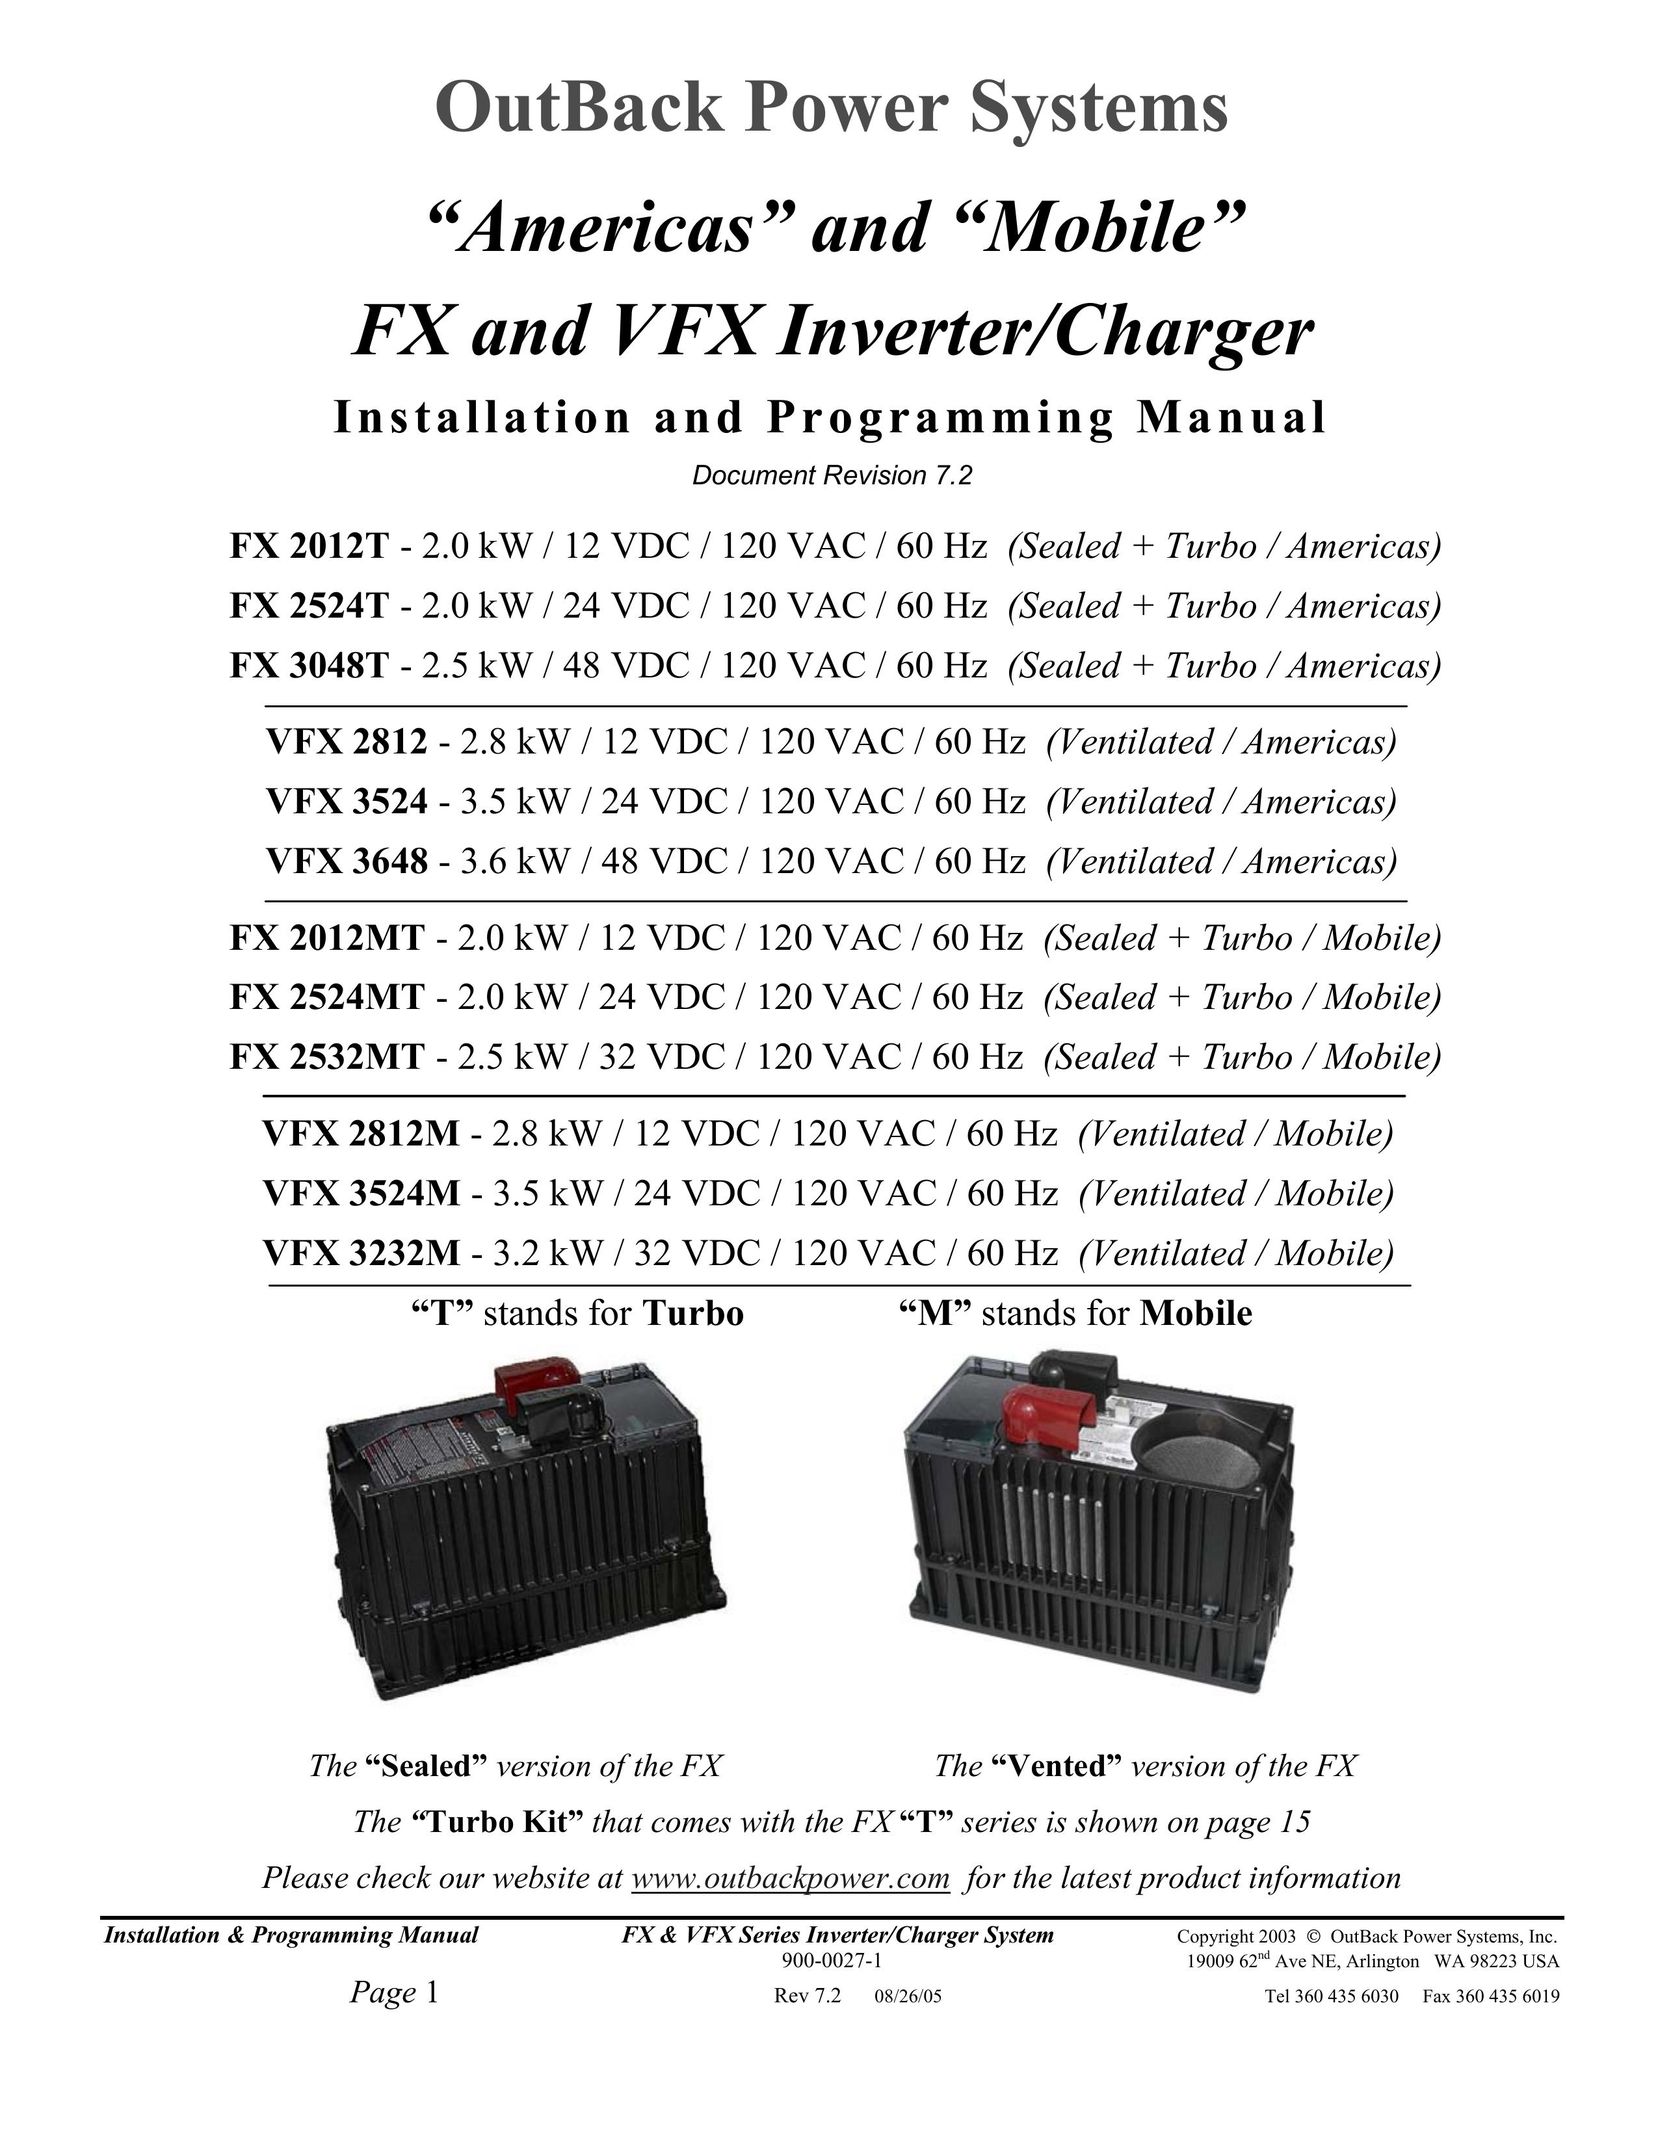 Outback Power Systems VFX2812M Power Supply User Manual